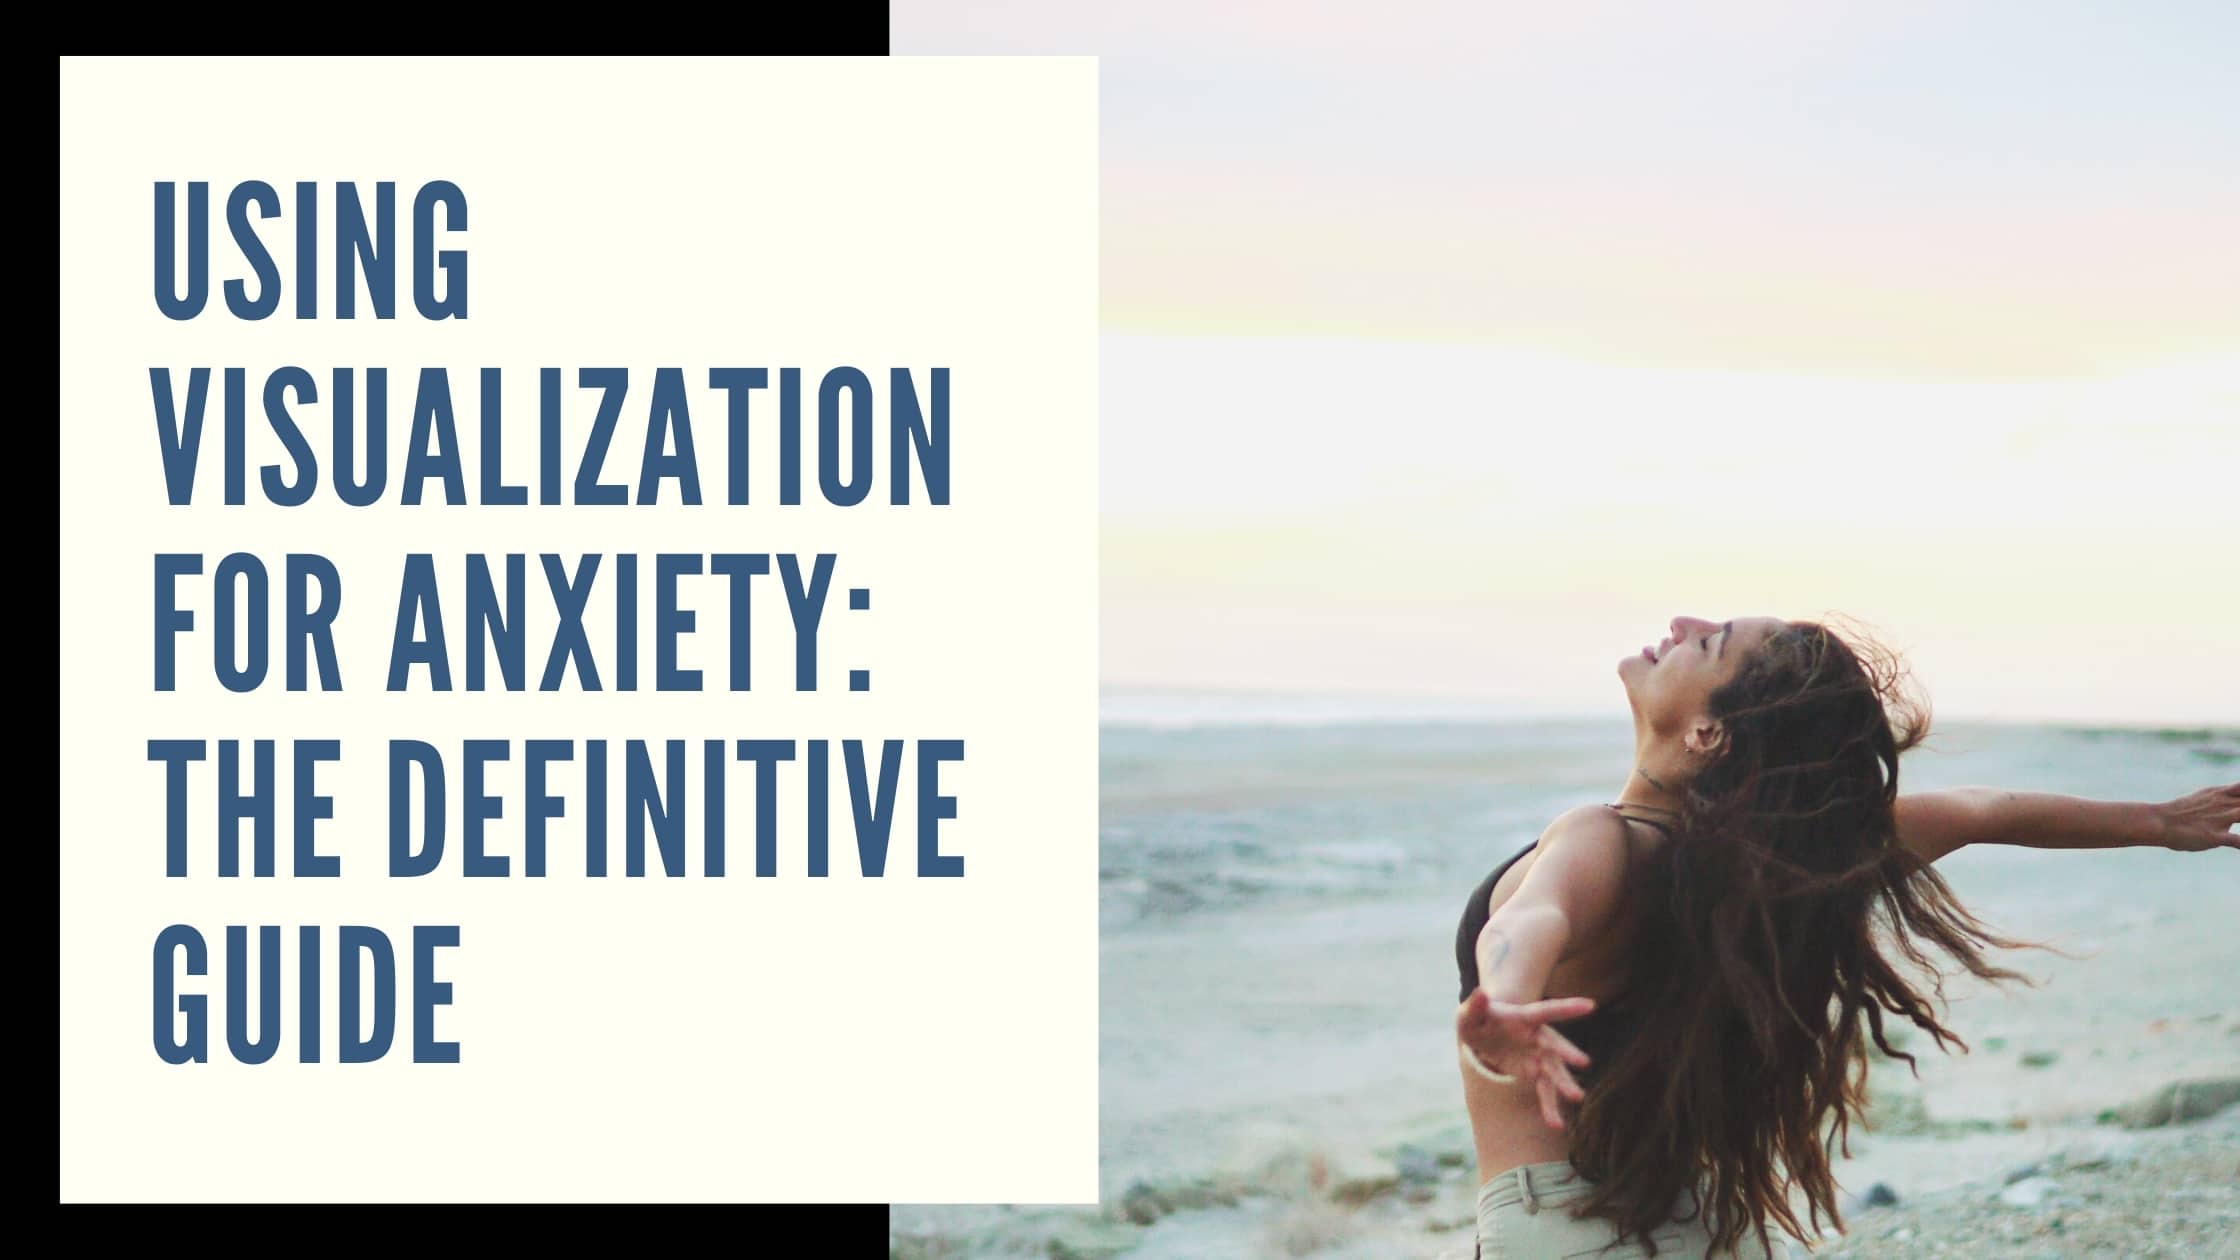 Using Visualization for Anxiety: The Definitive Guide